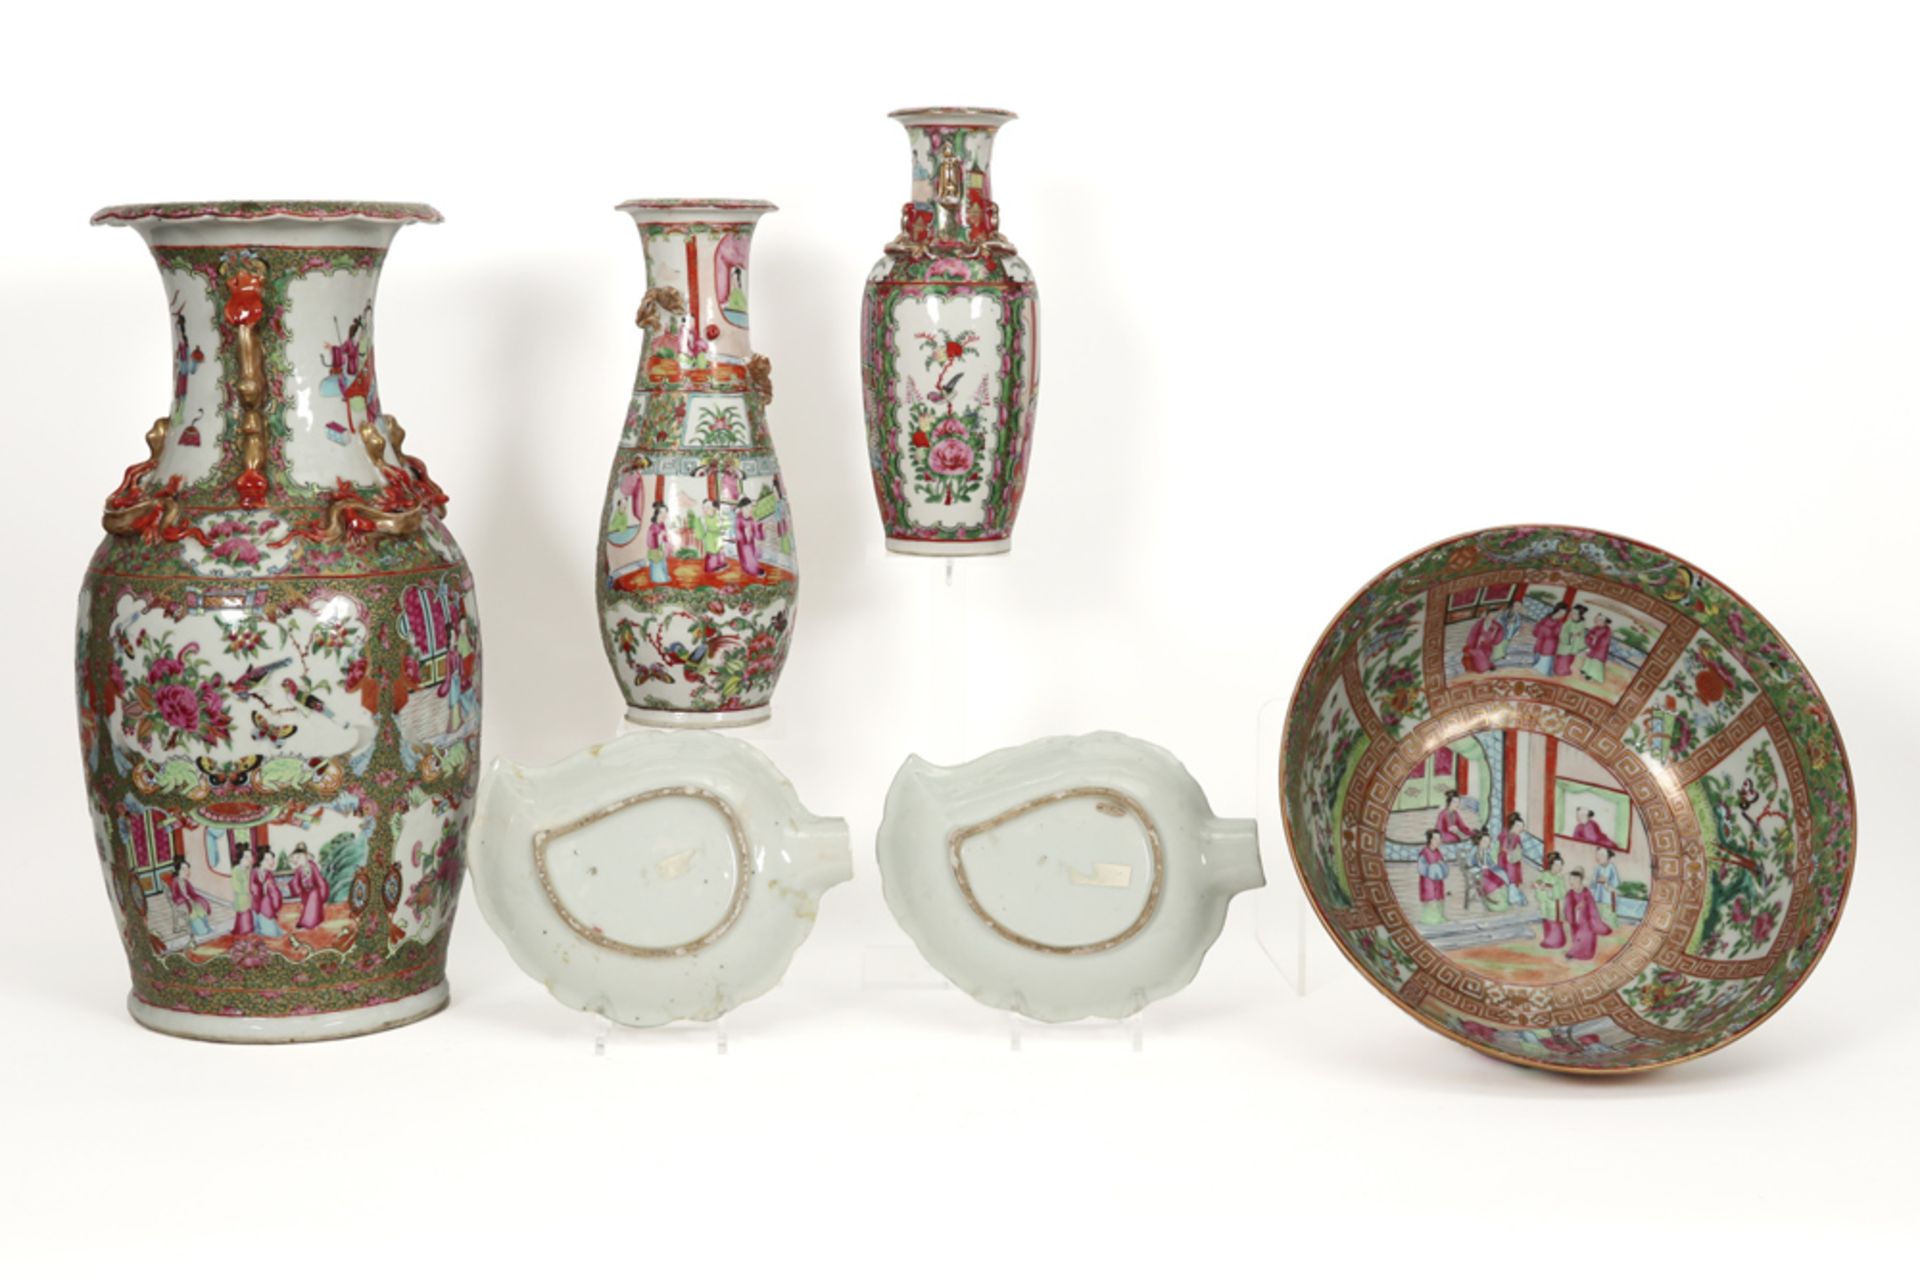 seven pieces of 19th Cent. Chinese porcelain with Cantonese decor : two vases, a bowl and two - Image 2 of 2